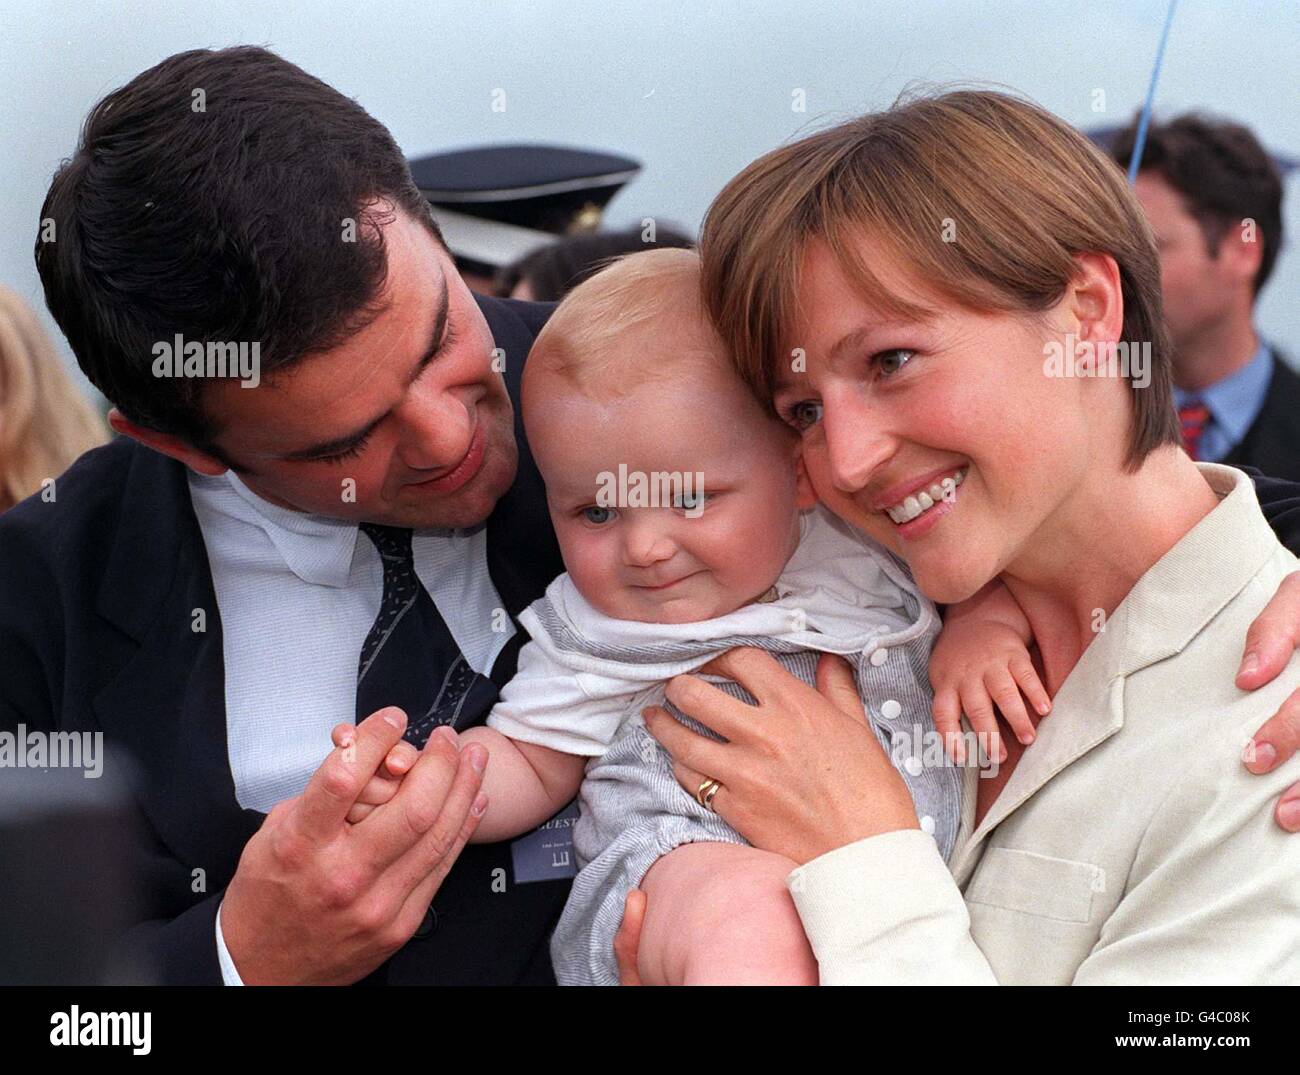 Former England rugby captain Will Carling and his girlfriend Ali Cockayne and their nine-month-old son Henry, enjoying a day out at the Alfred Dunhill Queen's Cup Polo at Smith's Lawn, Windsor Great Park. * 24/9/98 Carling has dumped his lover and the mother of his child - for the wife of a friend, it was reported. Carling is reported to have fallen for Lisa Cooke, the estranged wife of ex-rugby international David Cooke and is said to have ordered 28-year-old Ali and their 11-month-old son Henry out of his luxury home. According to reports tonight, Carling confirmed the spilt in a statement, Stock Photo